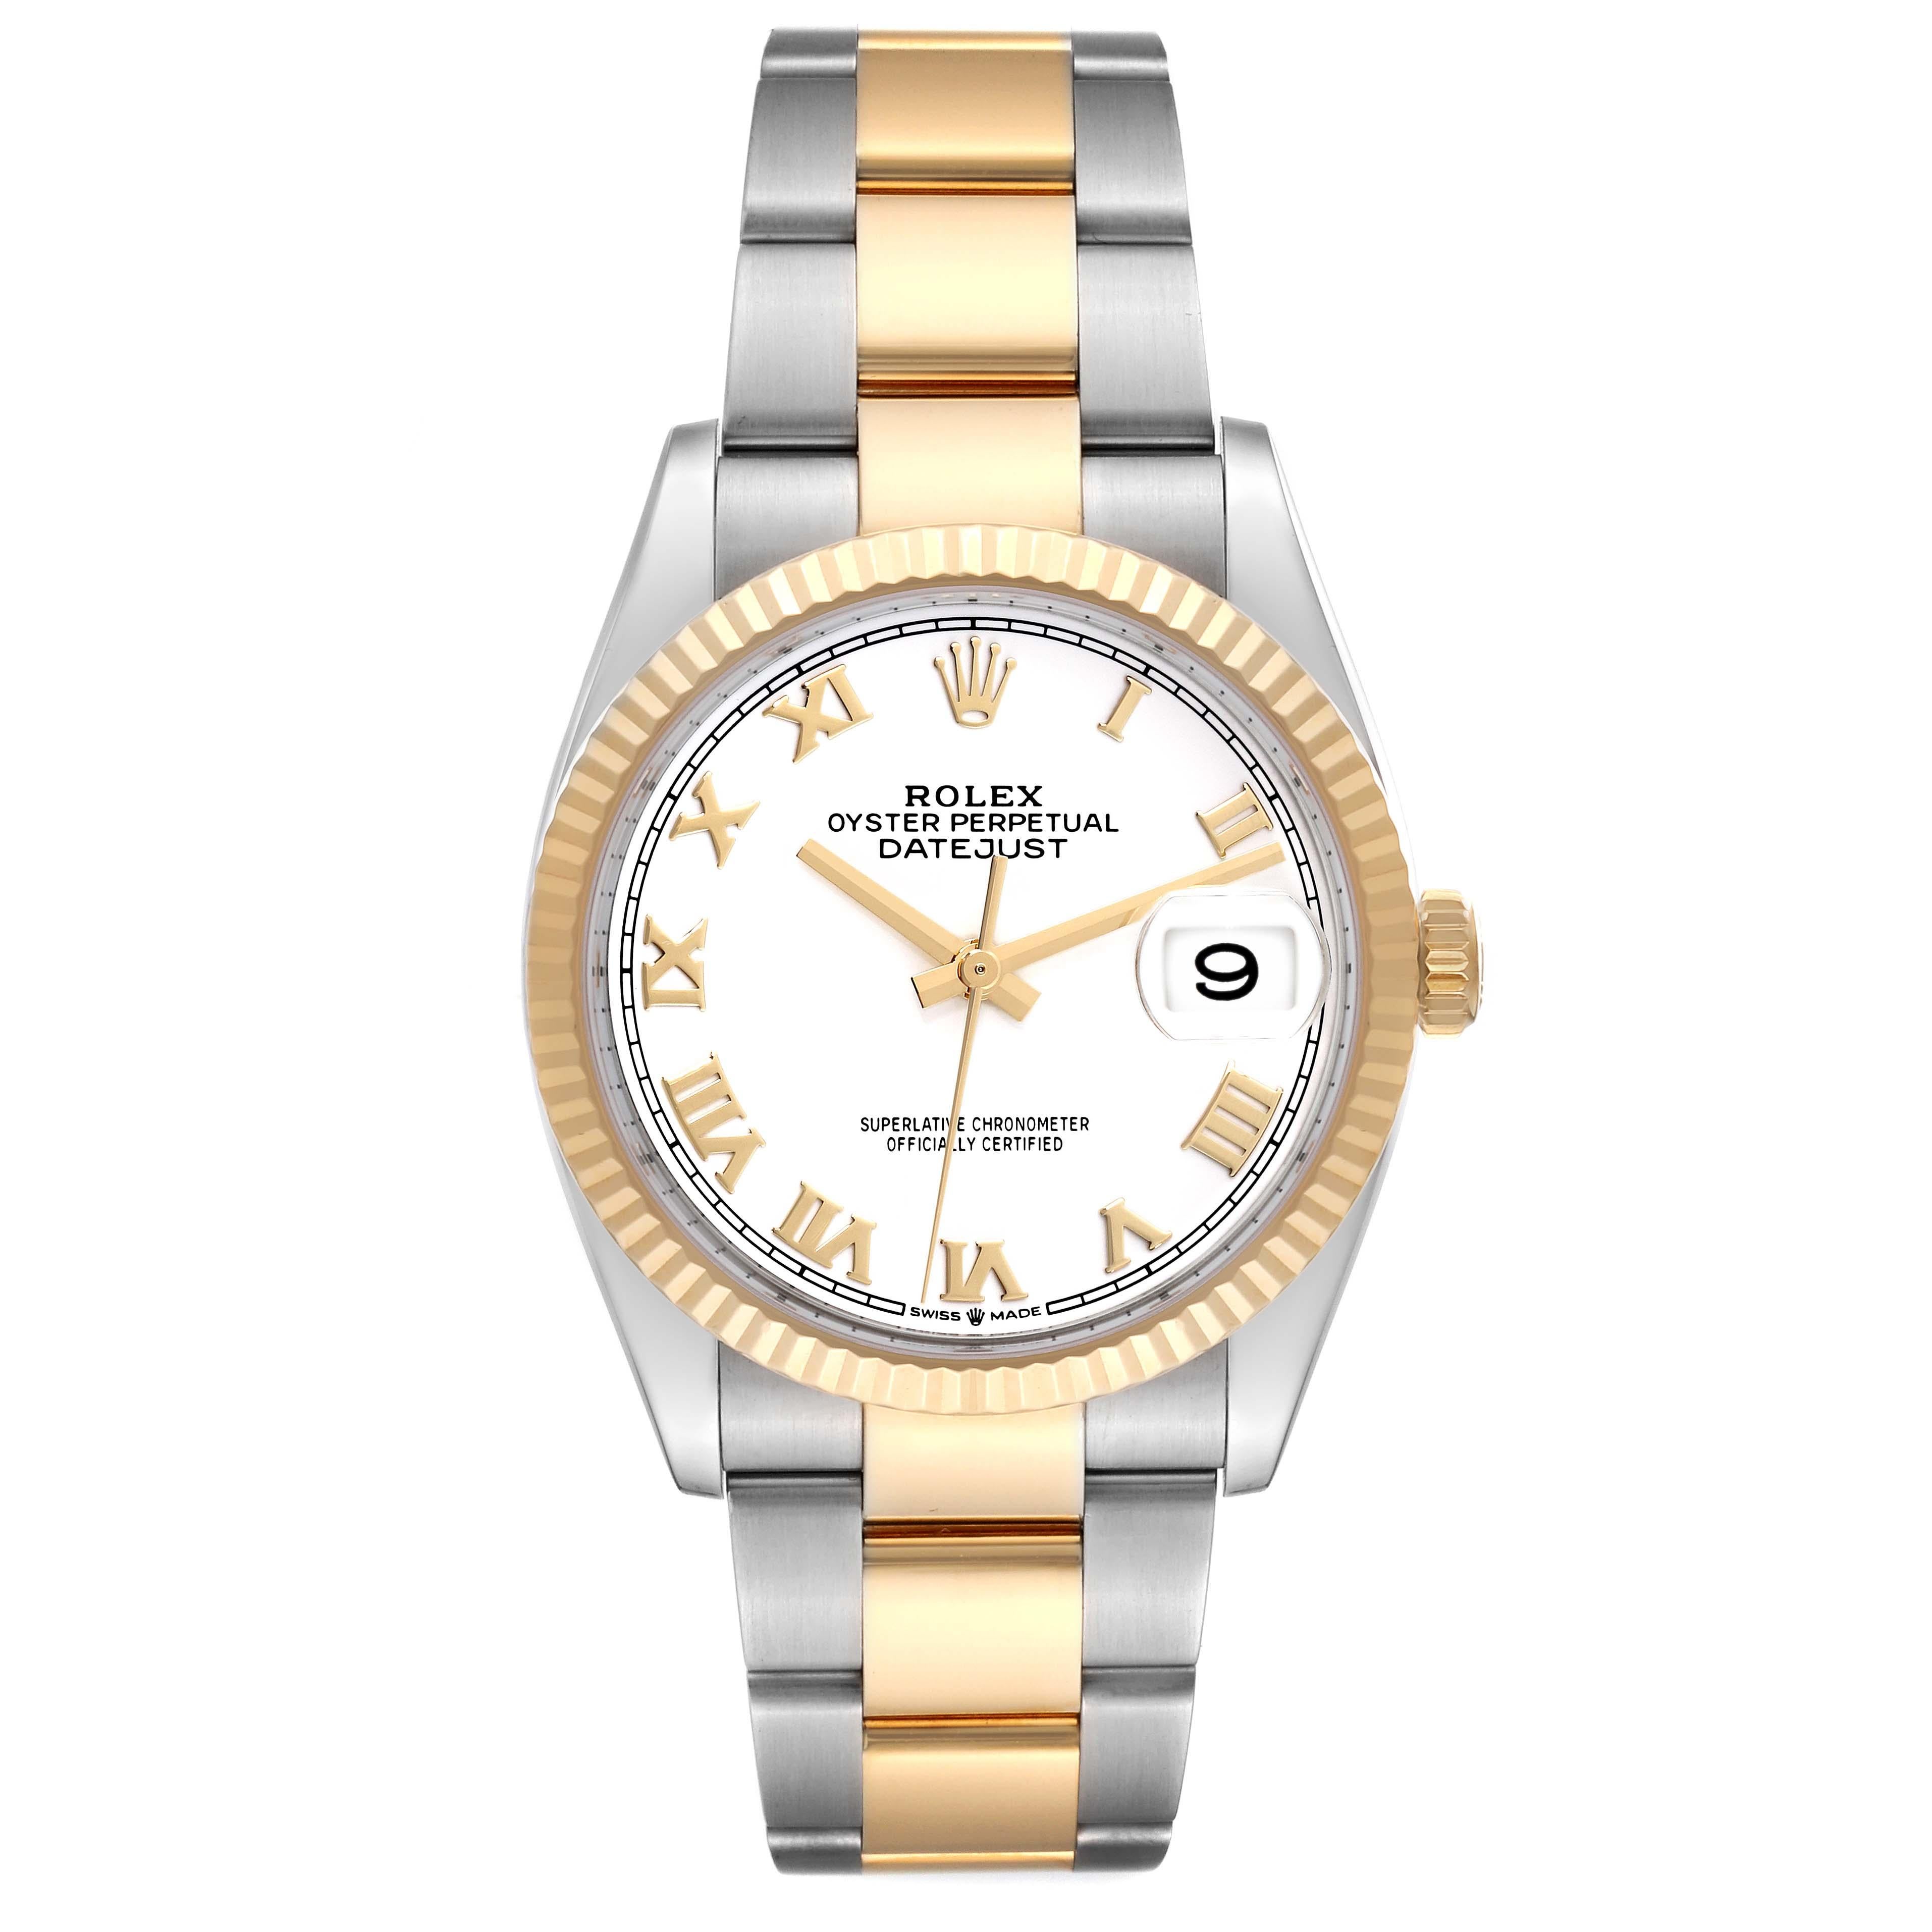 Rolex Datejust Steel Yellow Gold White Dial Mens Watch 126233 Box Card. Officially certified chronometer automatic self-winding movement. Stainless steel and 18K yellow gold case 36.0 mm in diameter. Rolex logo on a crown. 18K yellow gold fluted